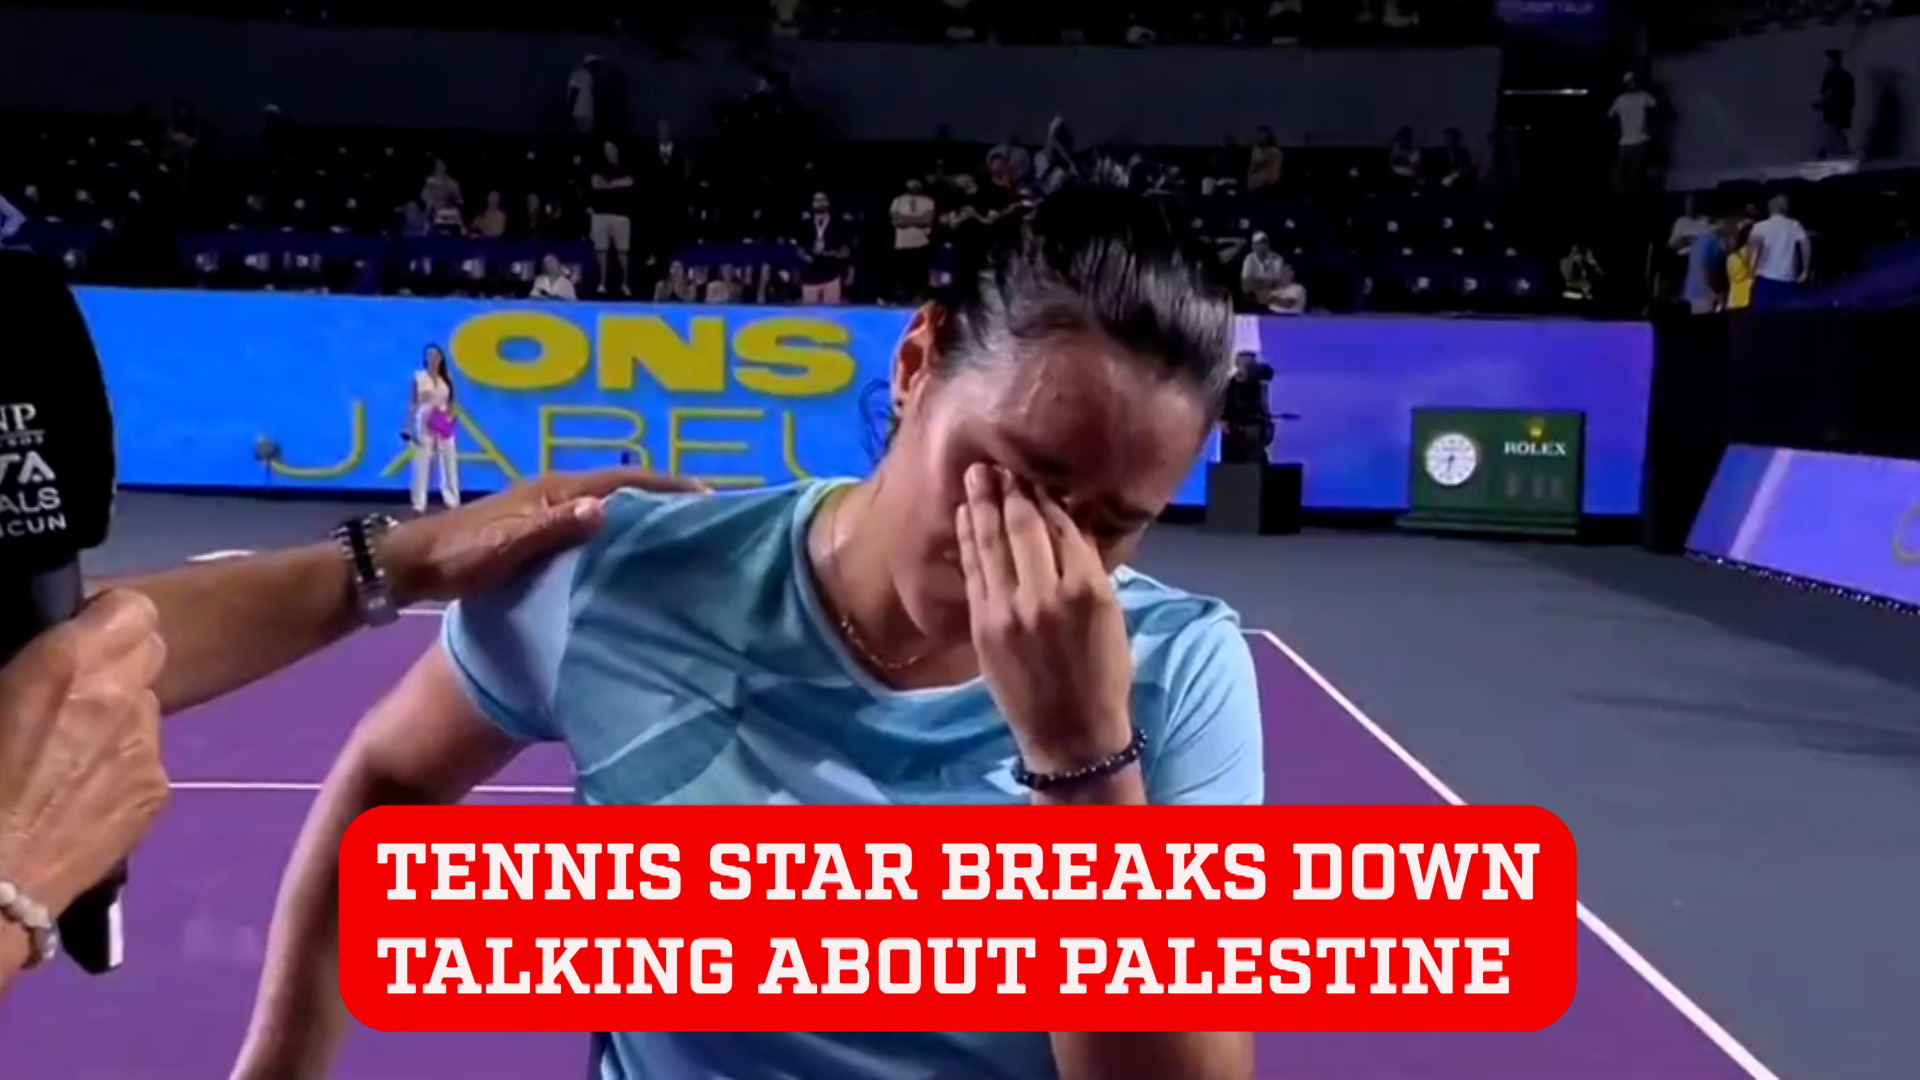 Tennis star bursts into tears while discussing the war between Israel and Palestine